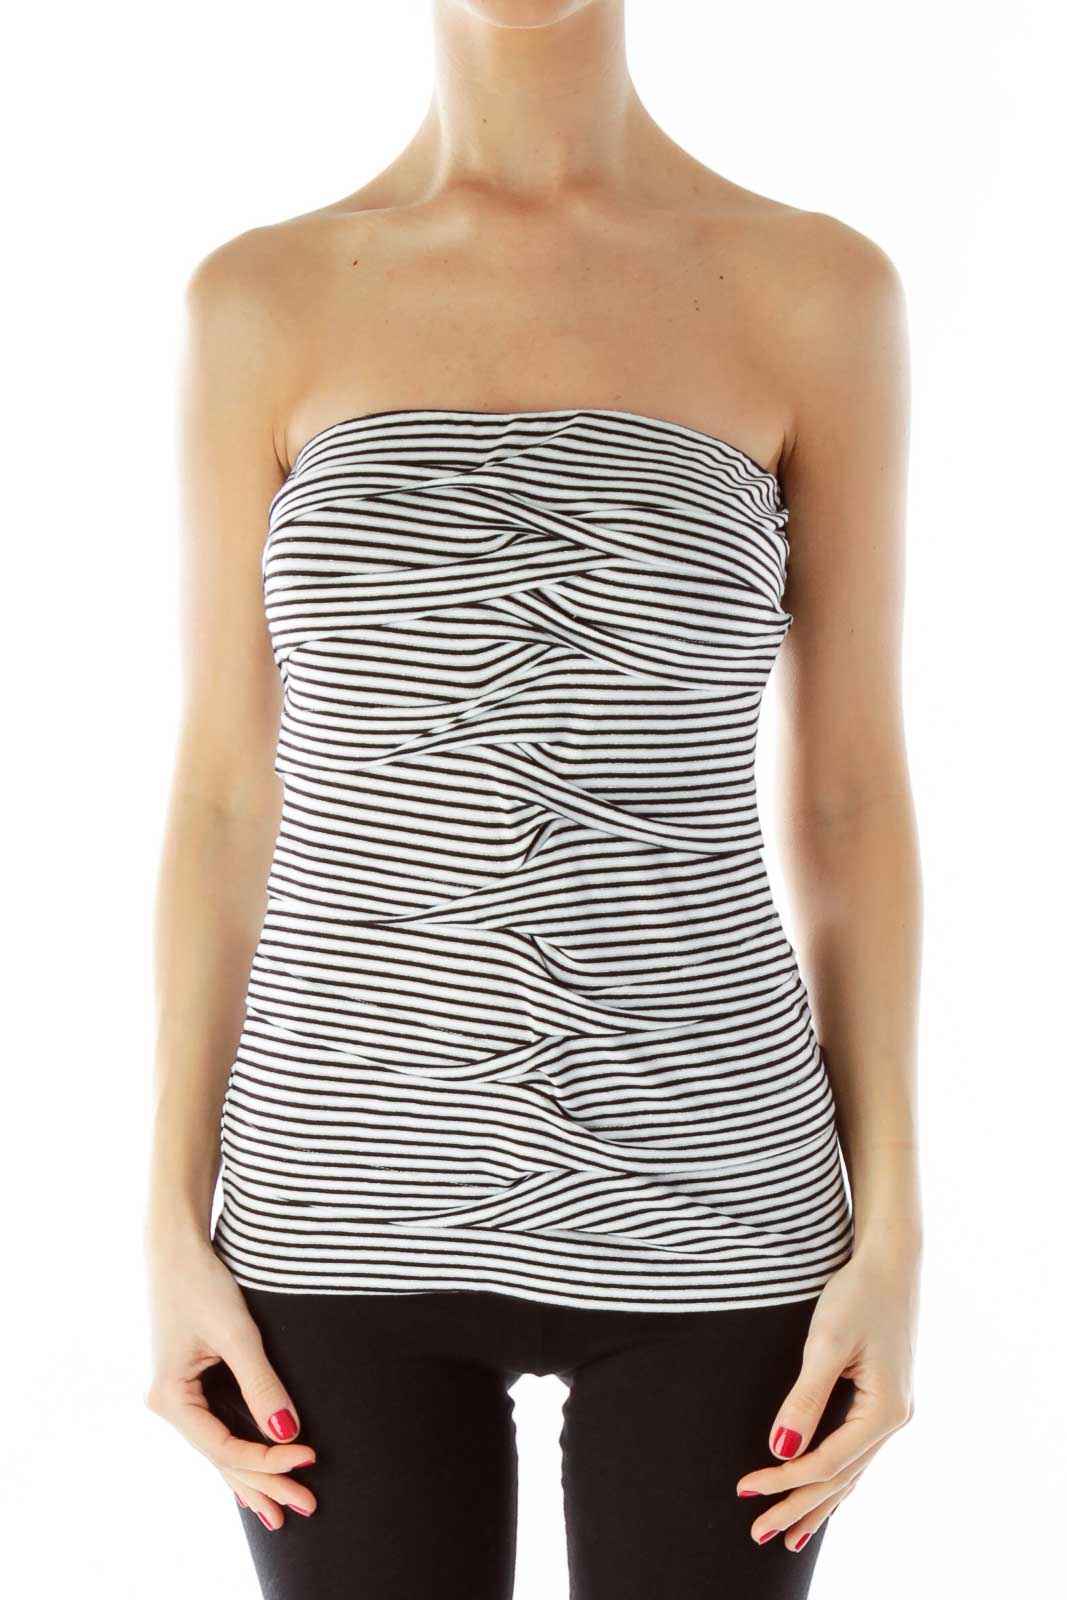 Black White Stripped Strapless Ruffled Top Front